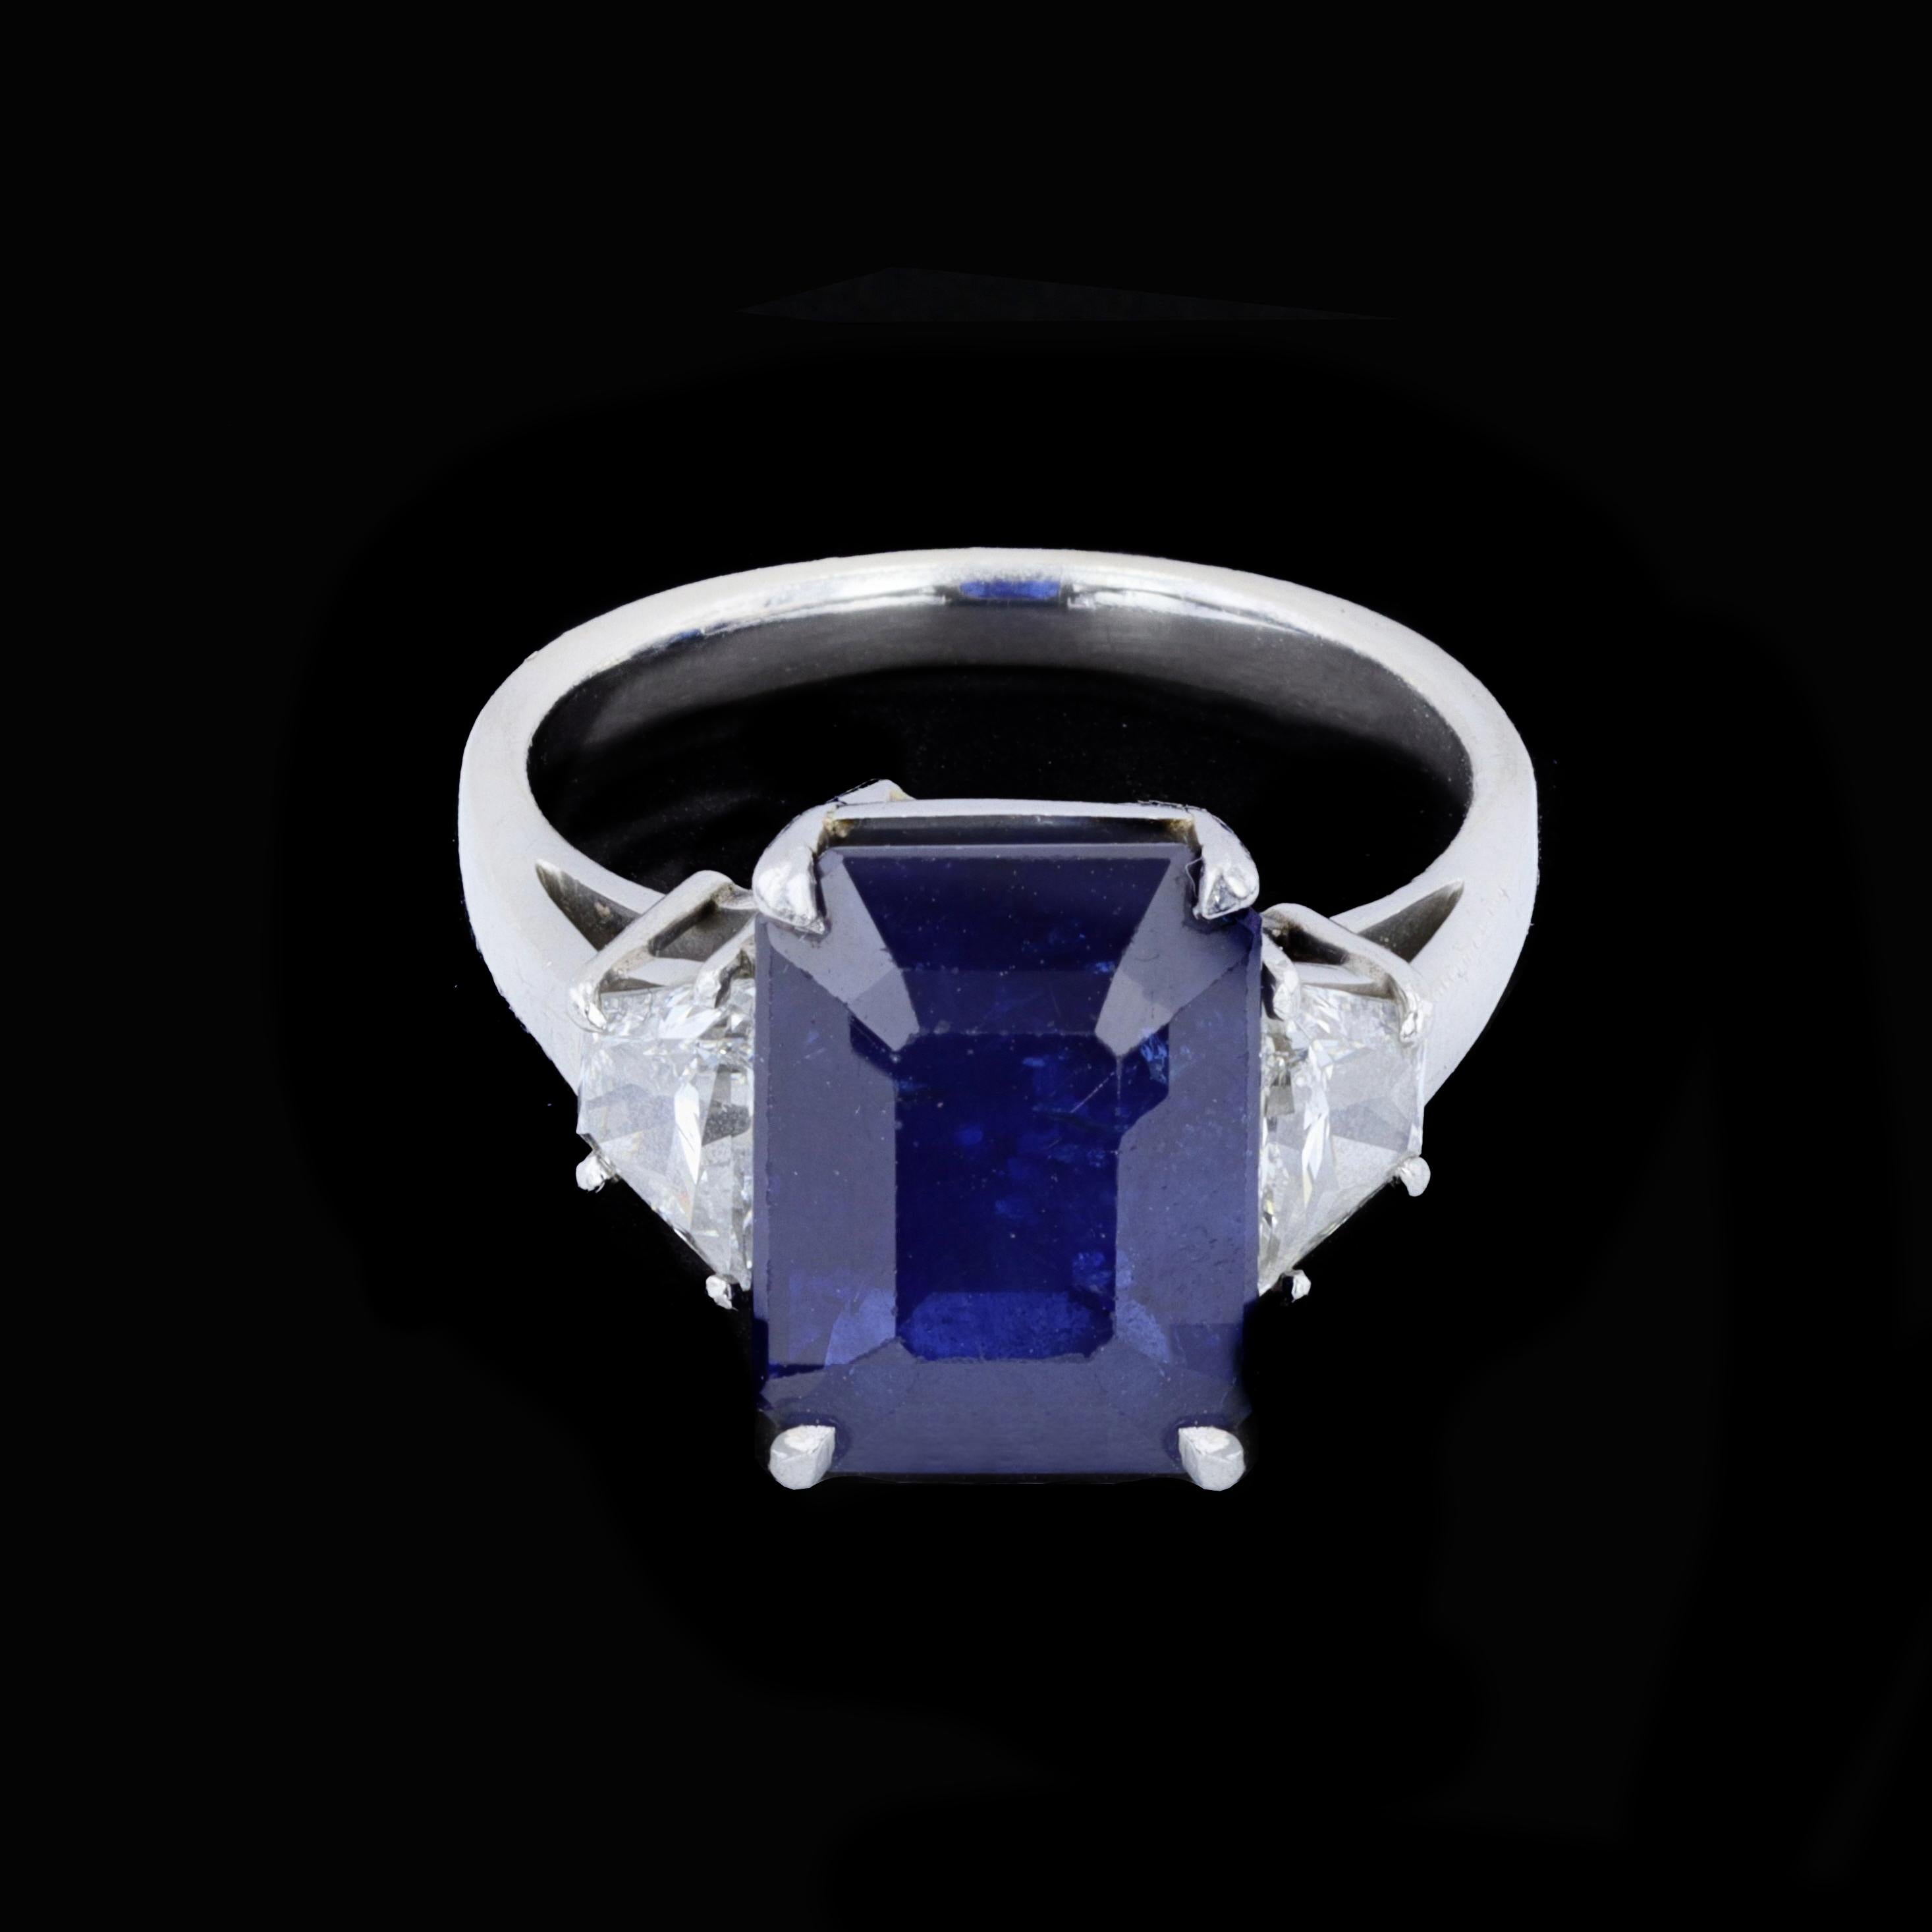 Classic retro style shines in this three stone sapphire and diamond vintage ring. The rich blue 7.59ctw emerald cut sapphire is supported by two trapezoid diamonds weighing 0.87 ctw and features a platinum setting.

